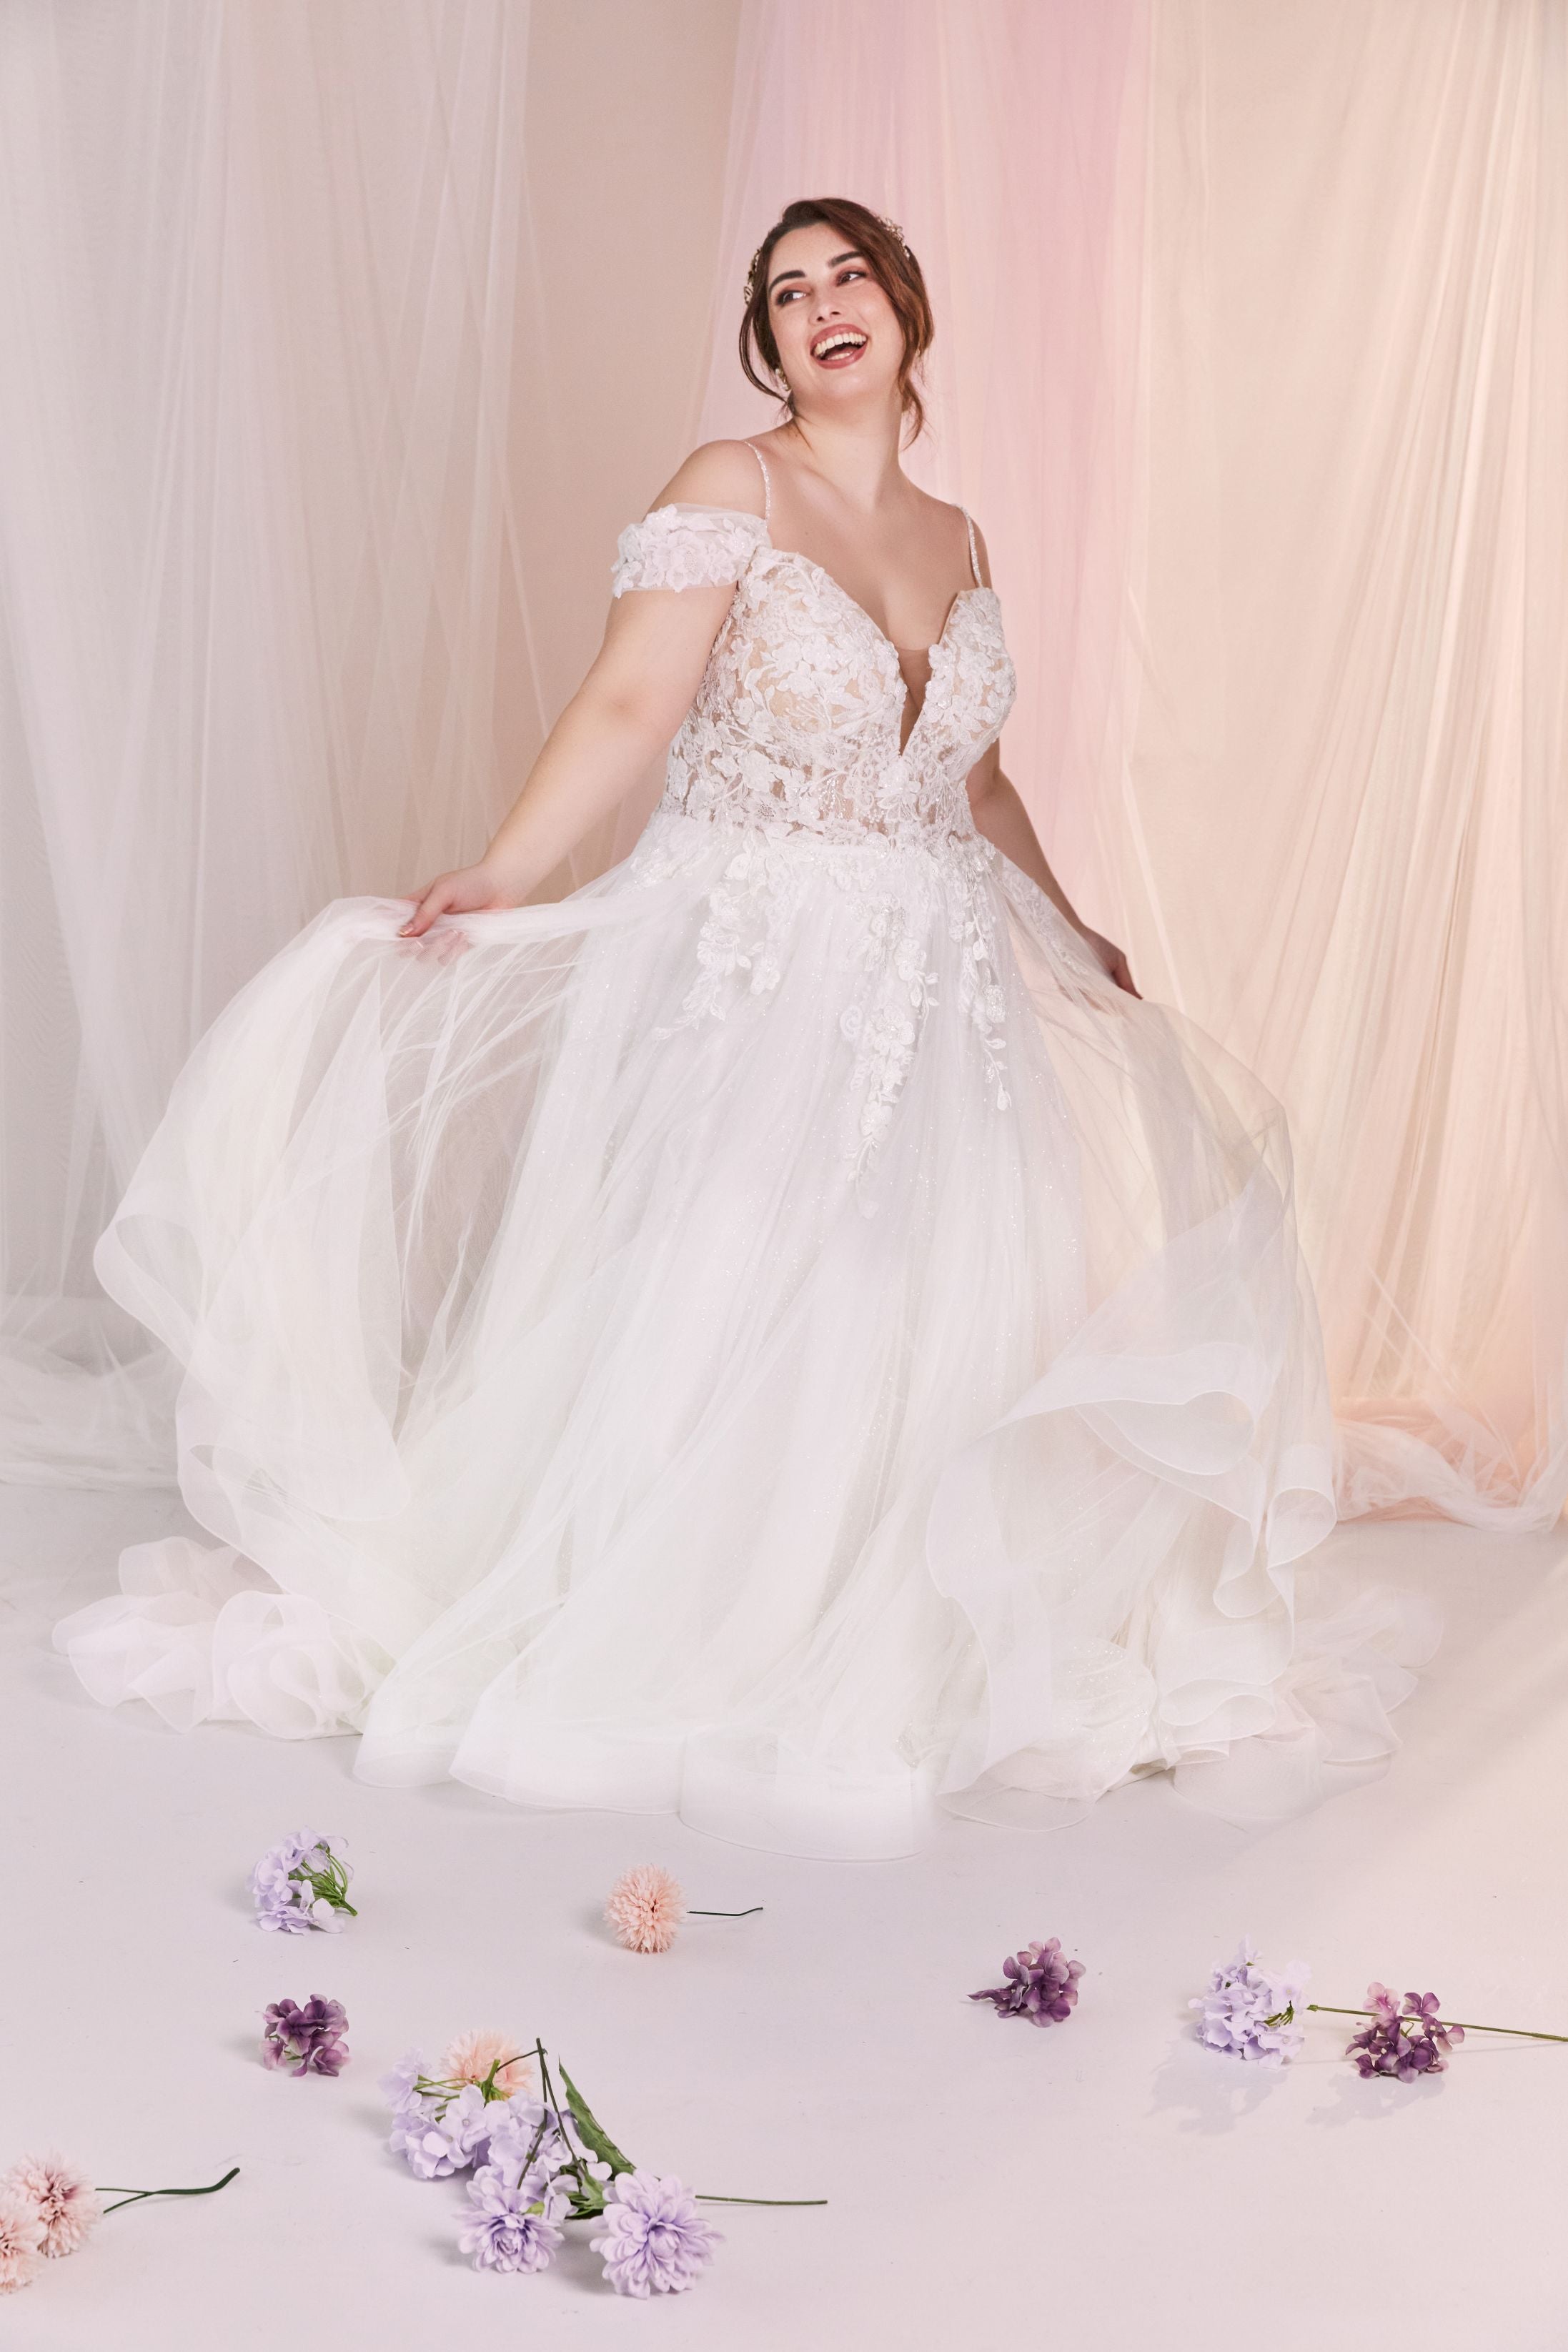 Lace and tulle A-line romantic wedding dress.